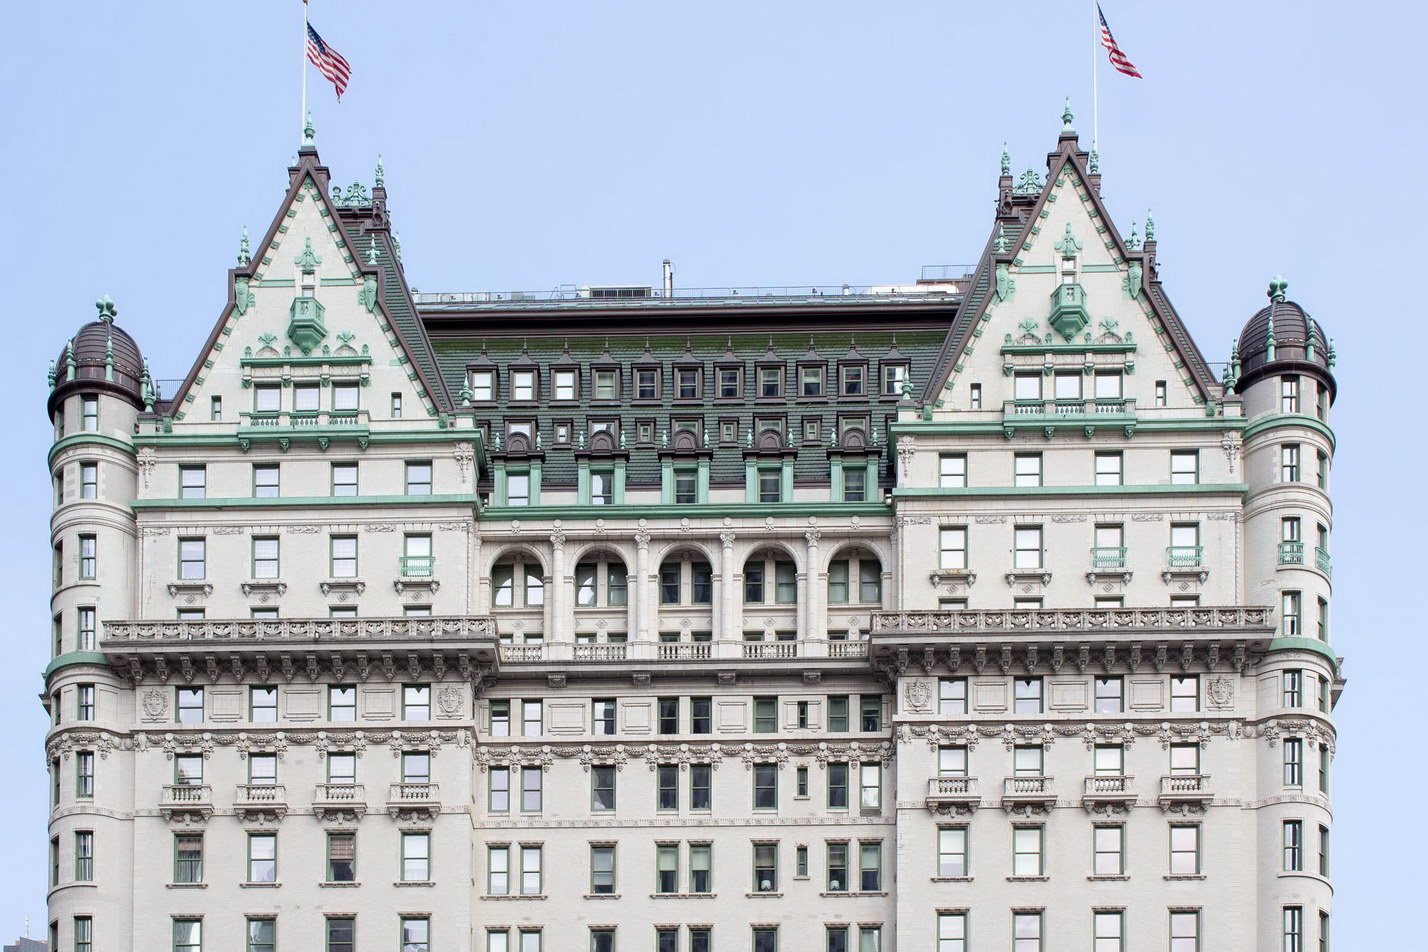 A fantastic mansard roof crowns Plaza Hotel, underscored by tiers of balustrades and terra cotta.